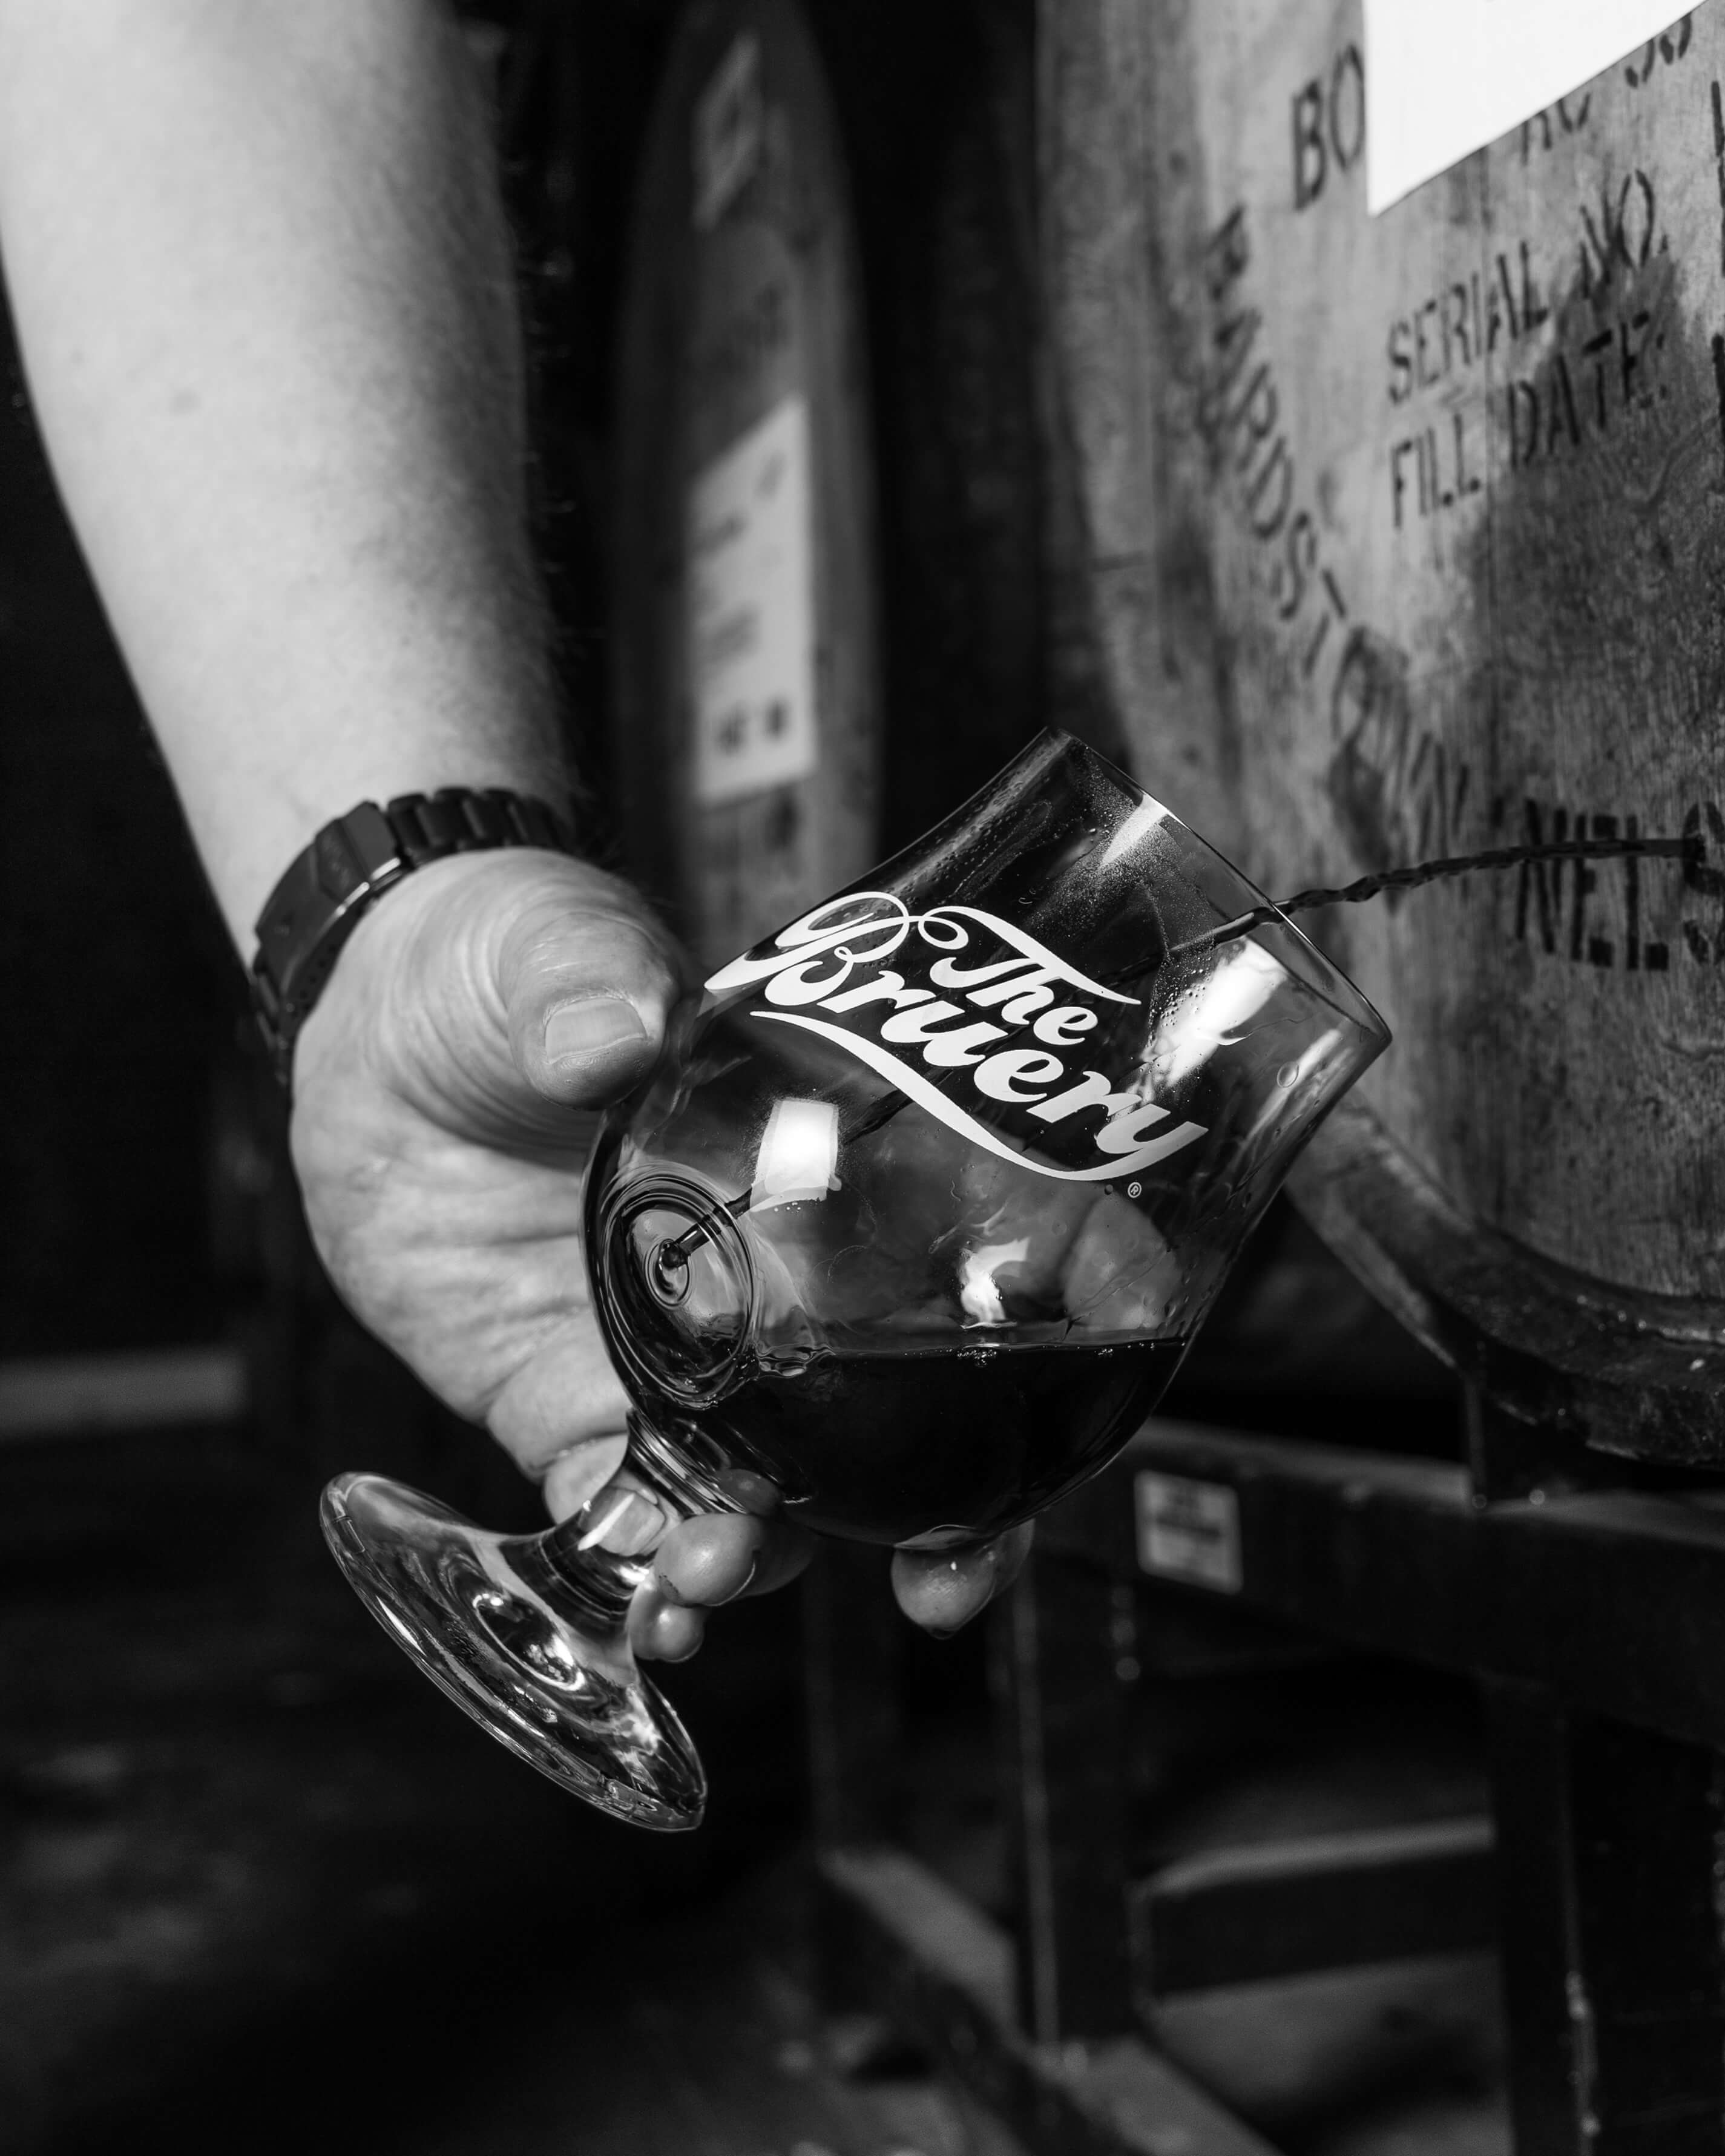 Black Tuesday poured directly from a bourbon barrel